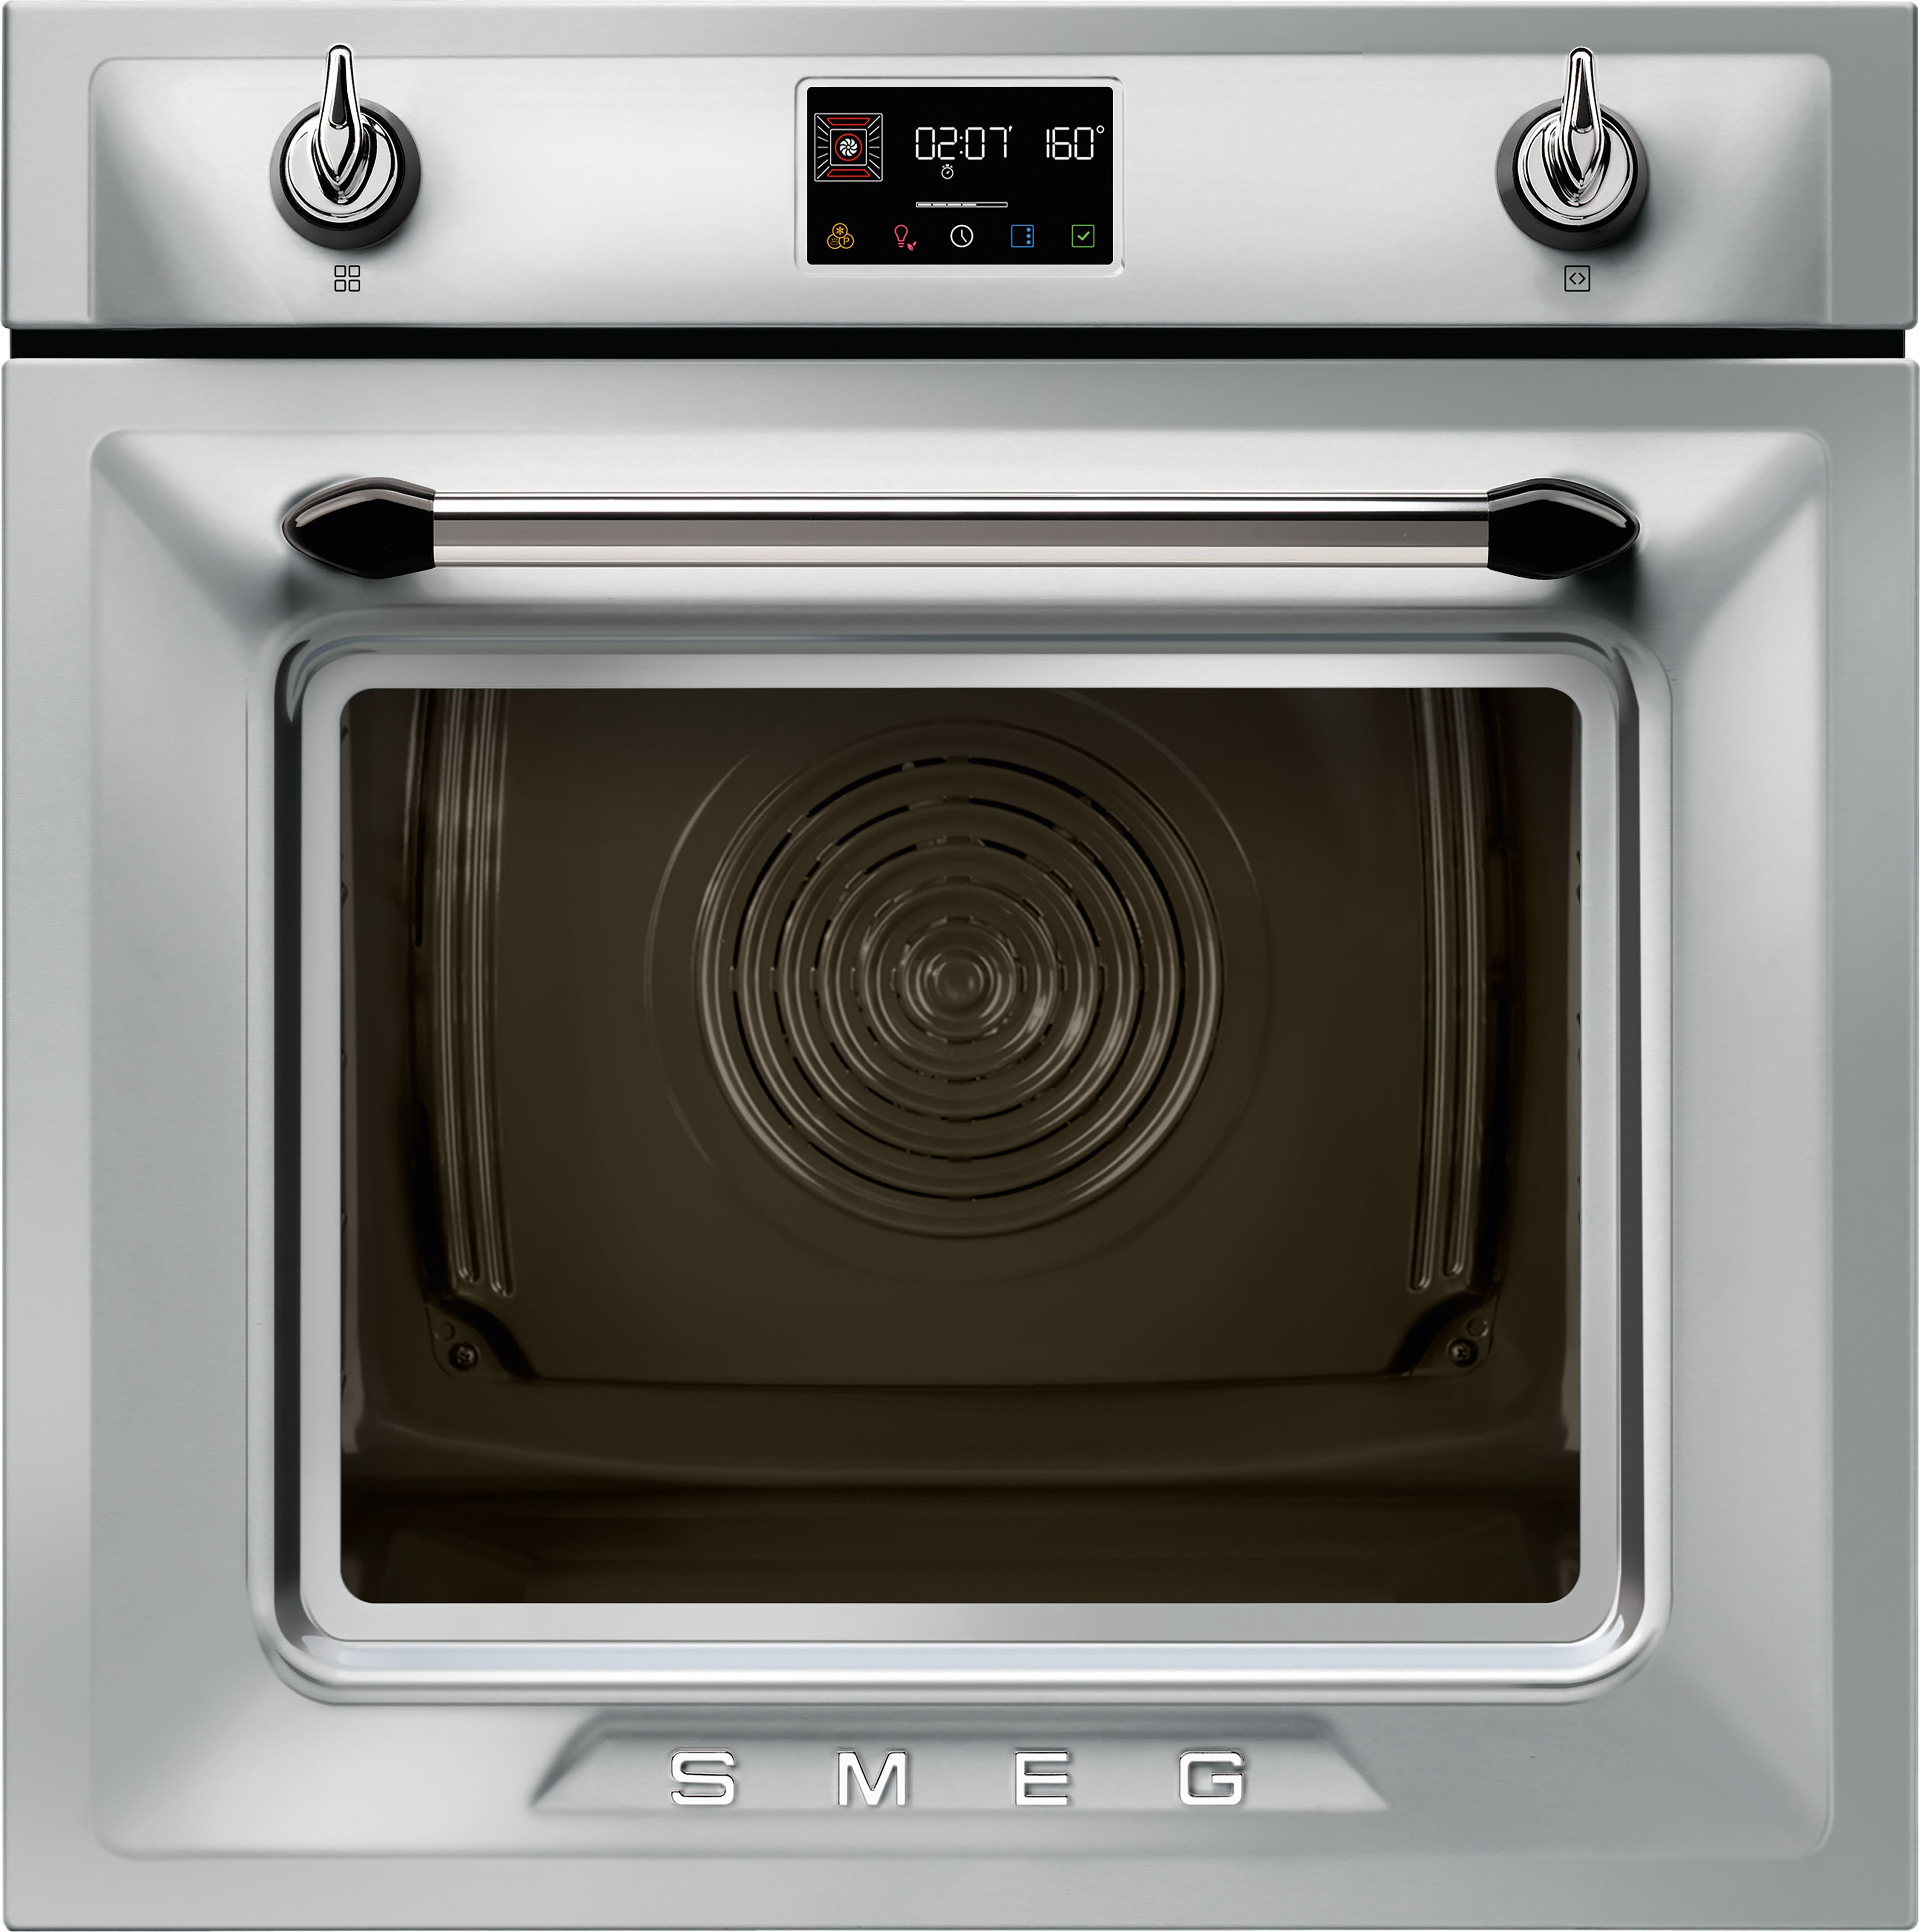 Smeg Victoria SOP6902S2PX Built In Electric Single Oven - Stainless Steel - A+ Rated, Stainless Steel